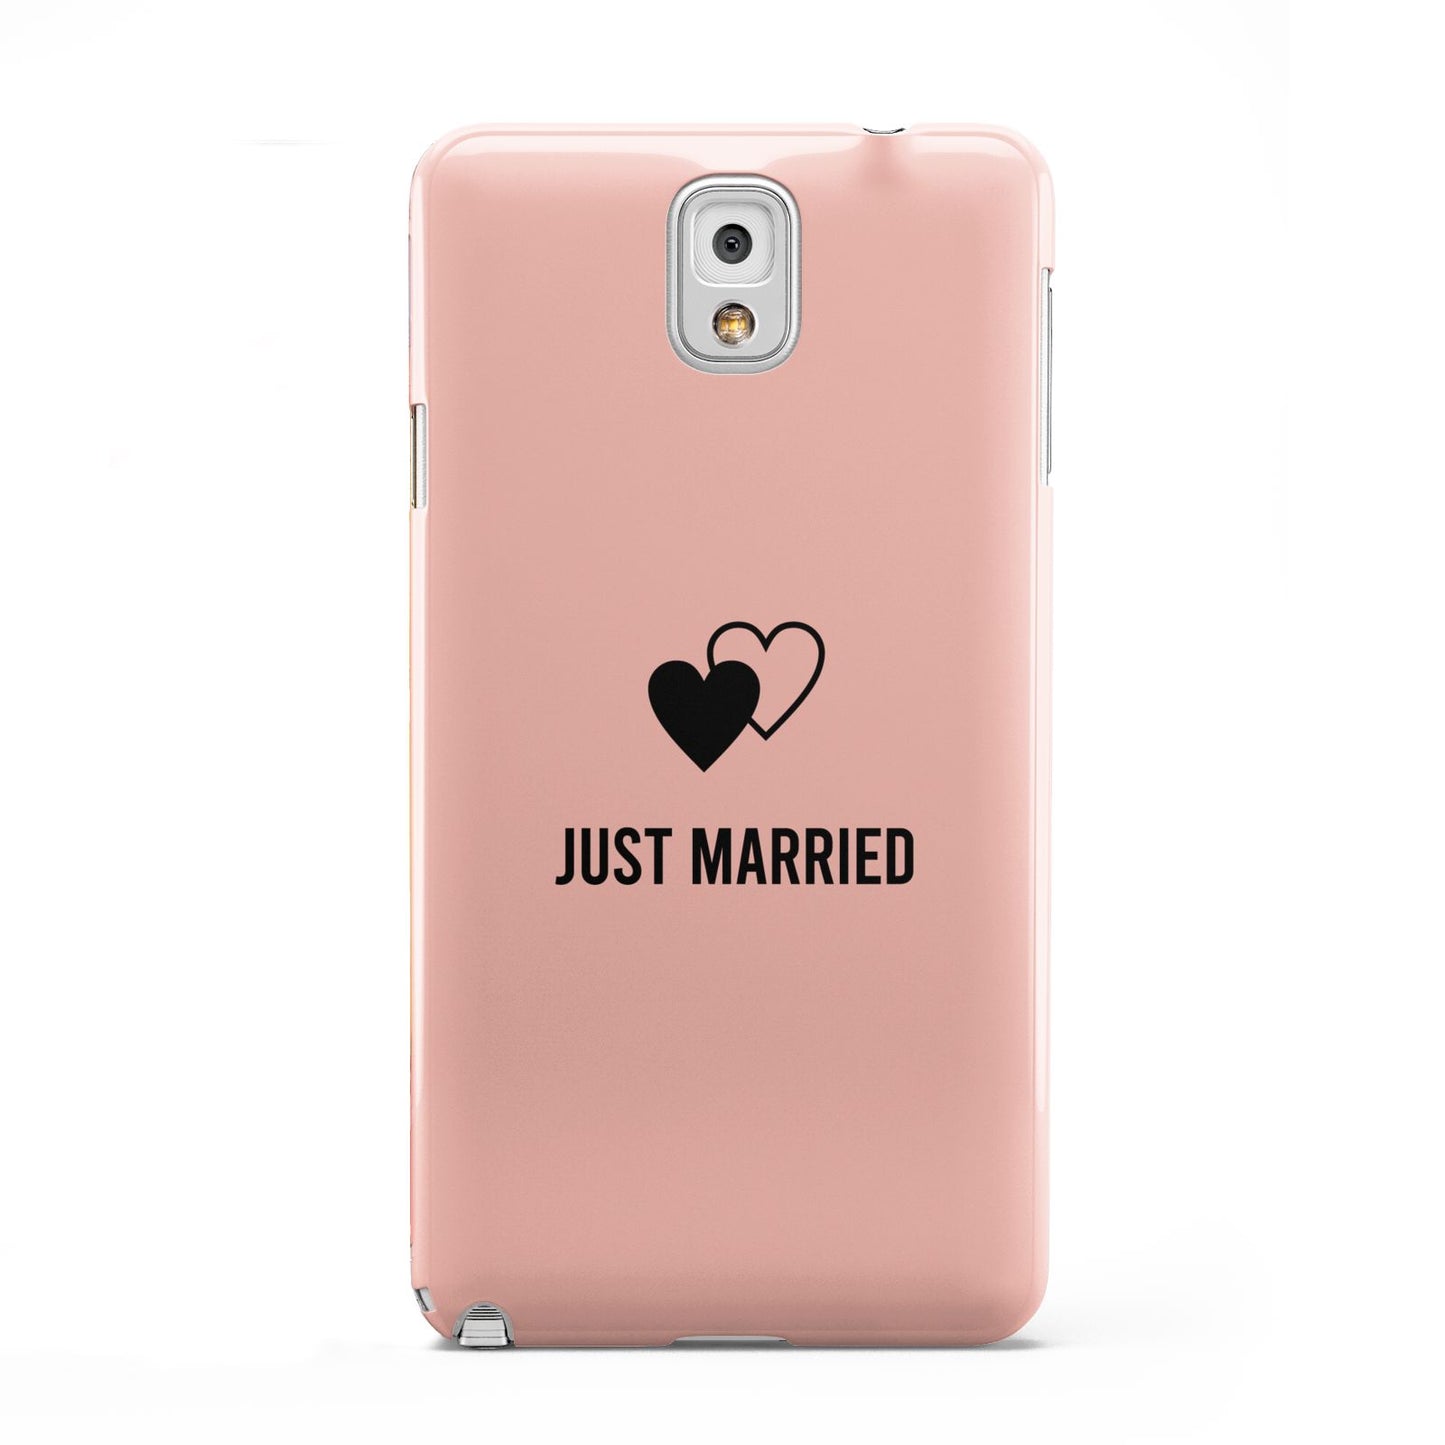 Just Married Samsung Galaxy Note 3 Case